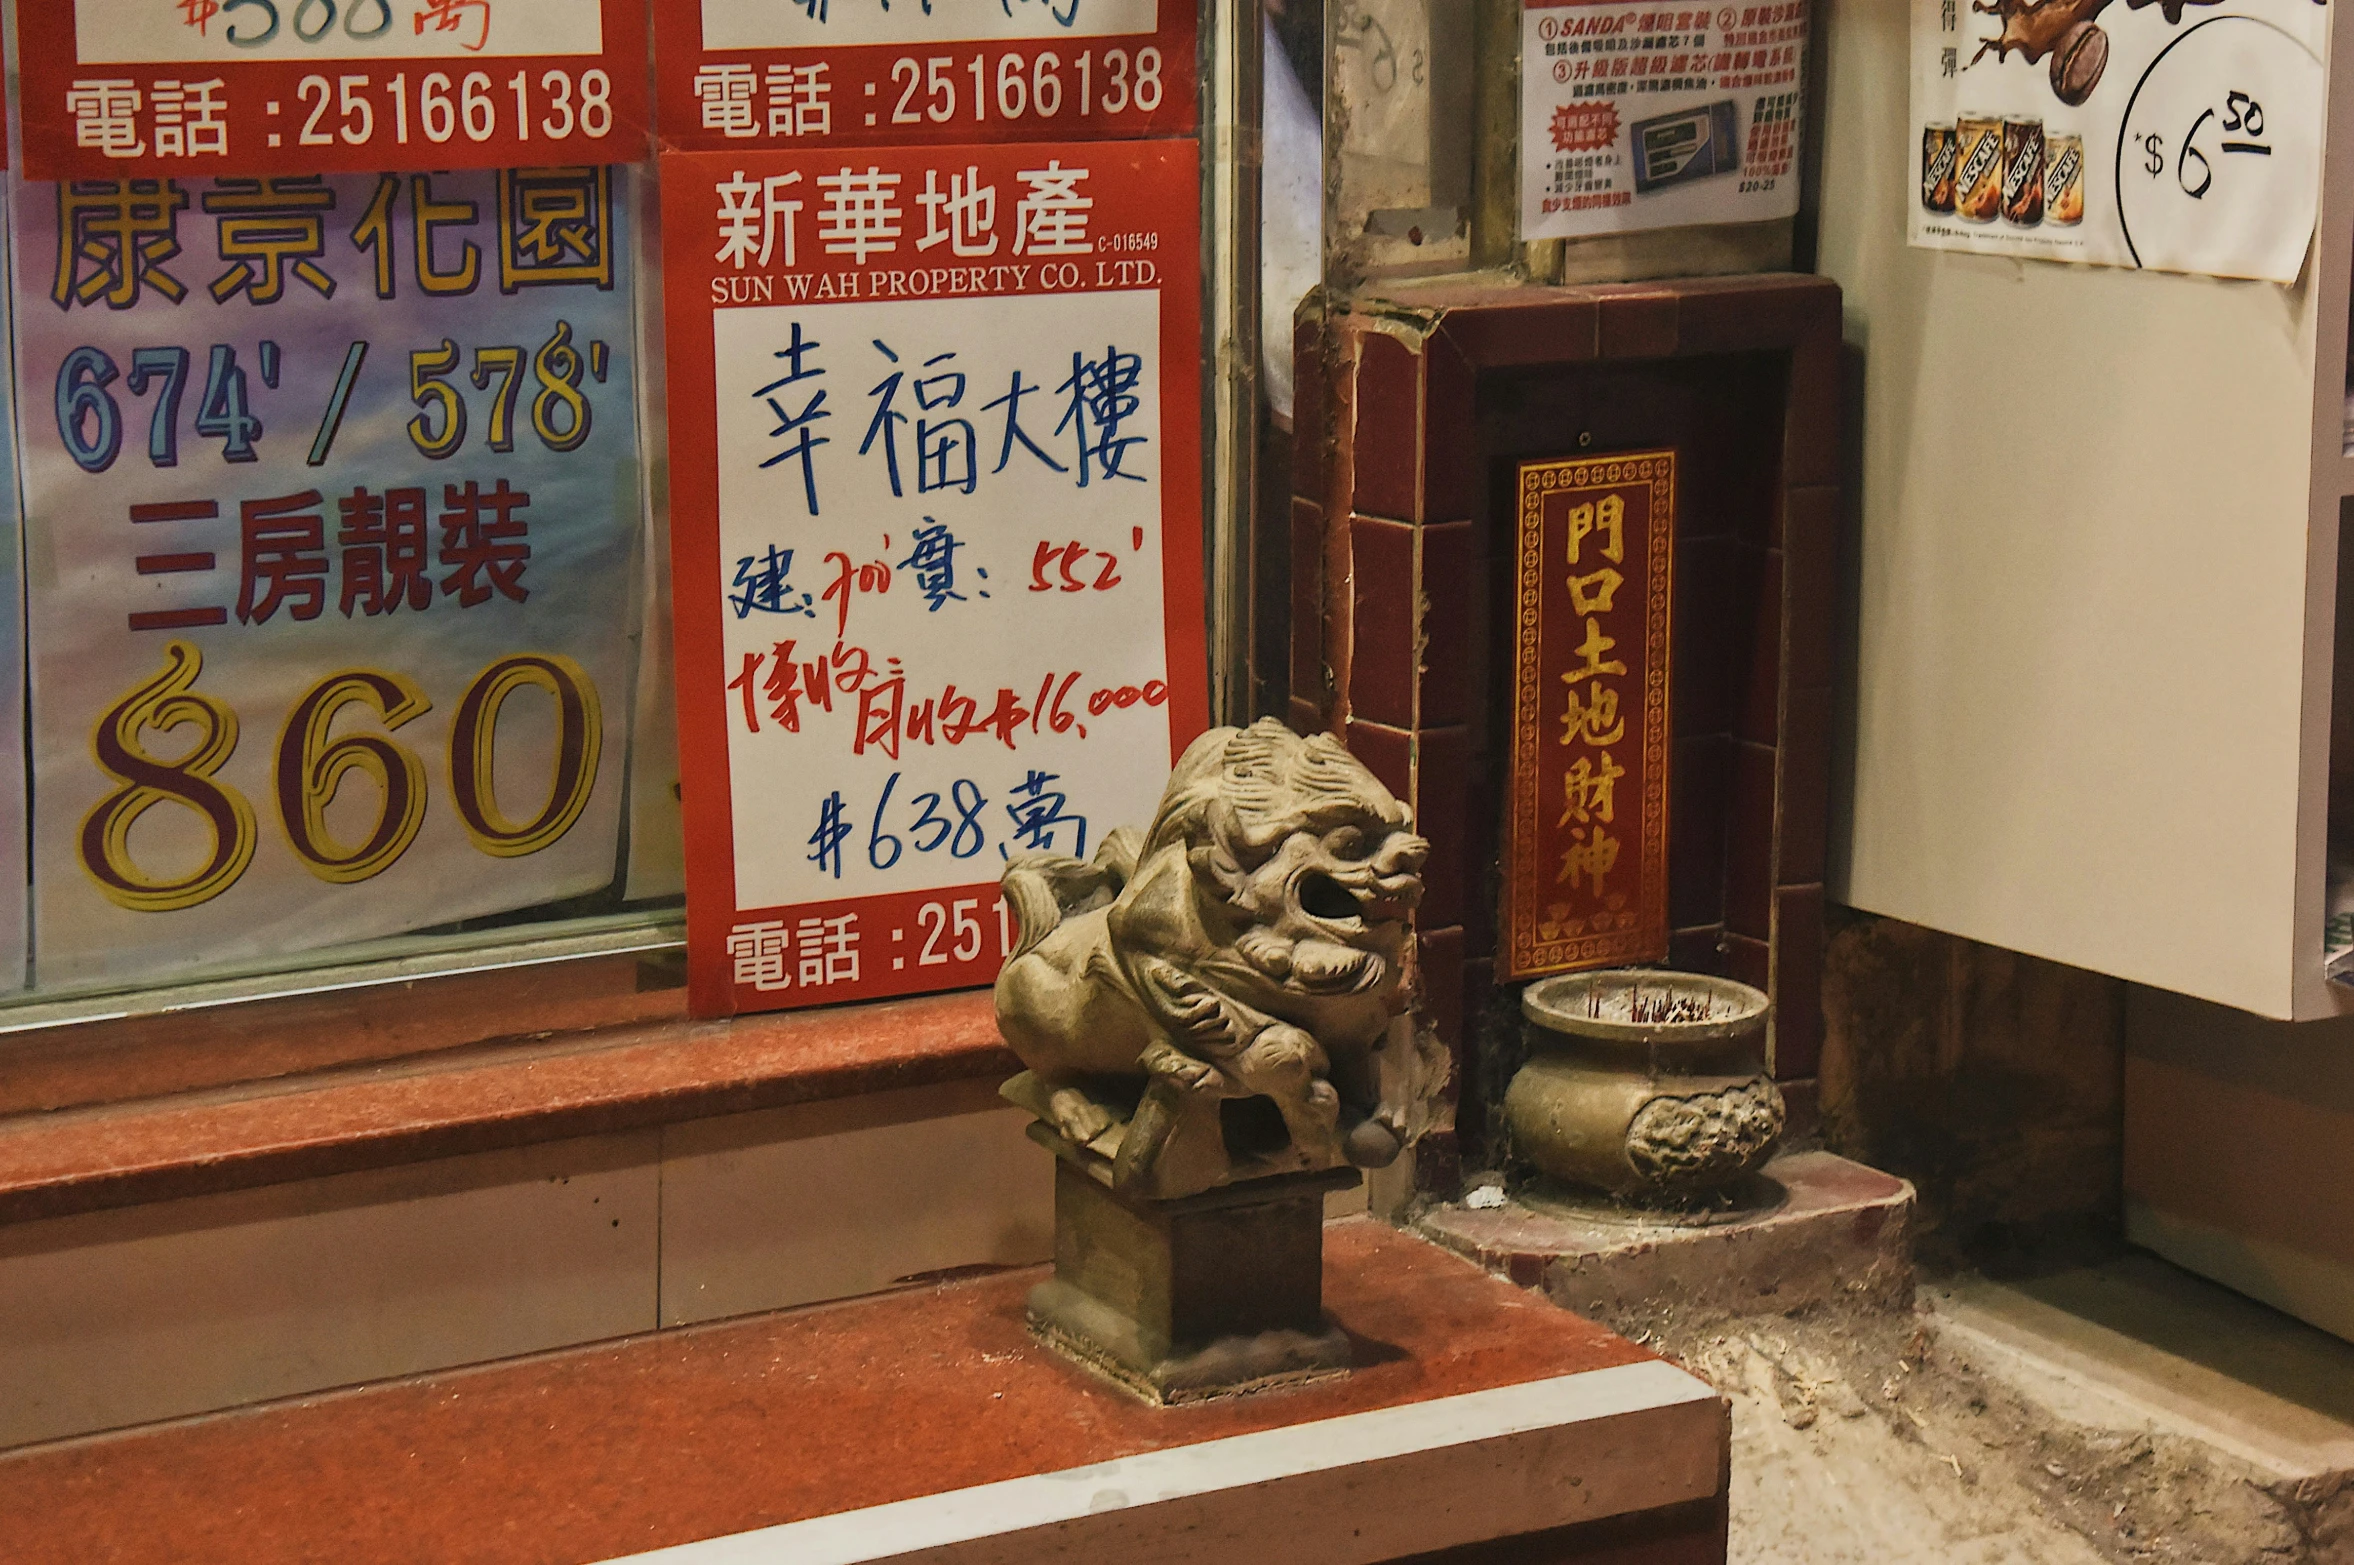 some chinese characters are shown outside a shop